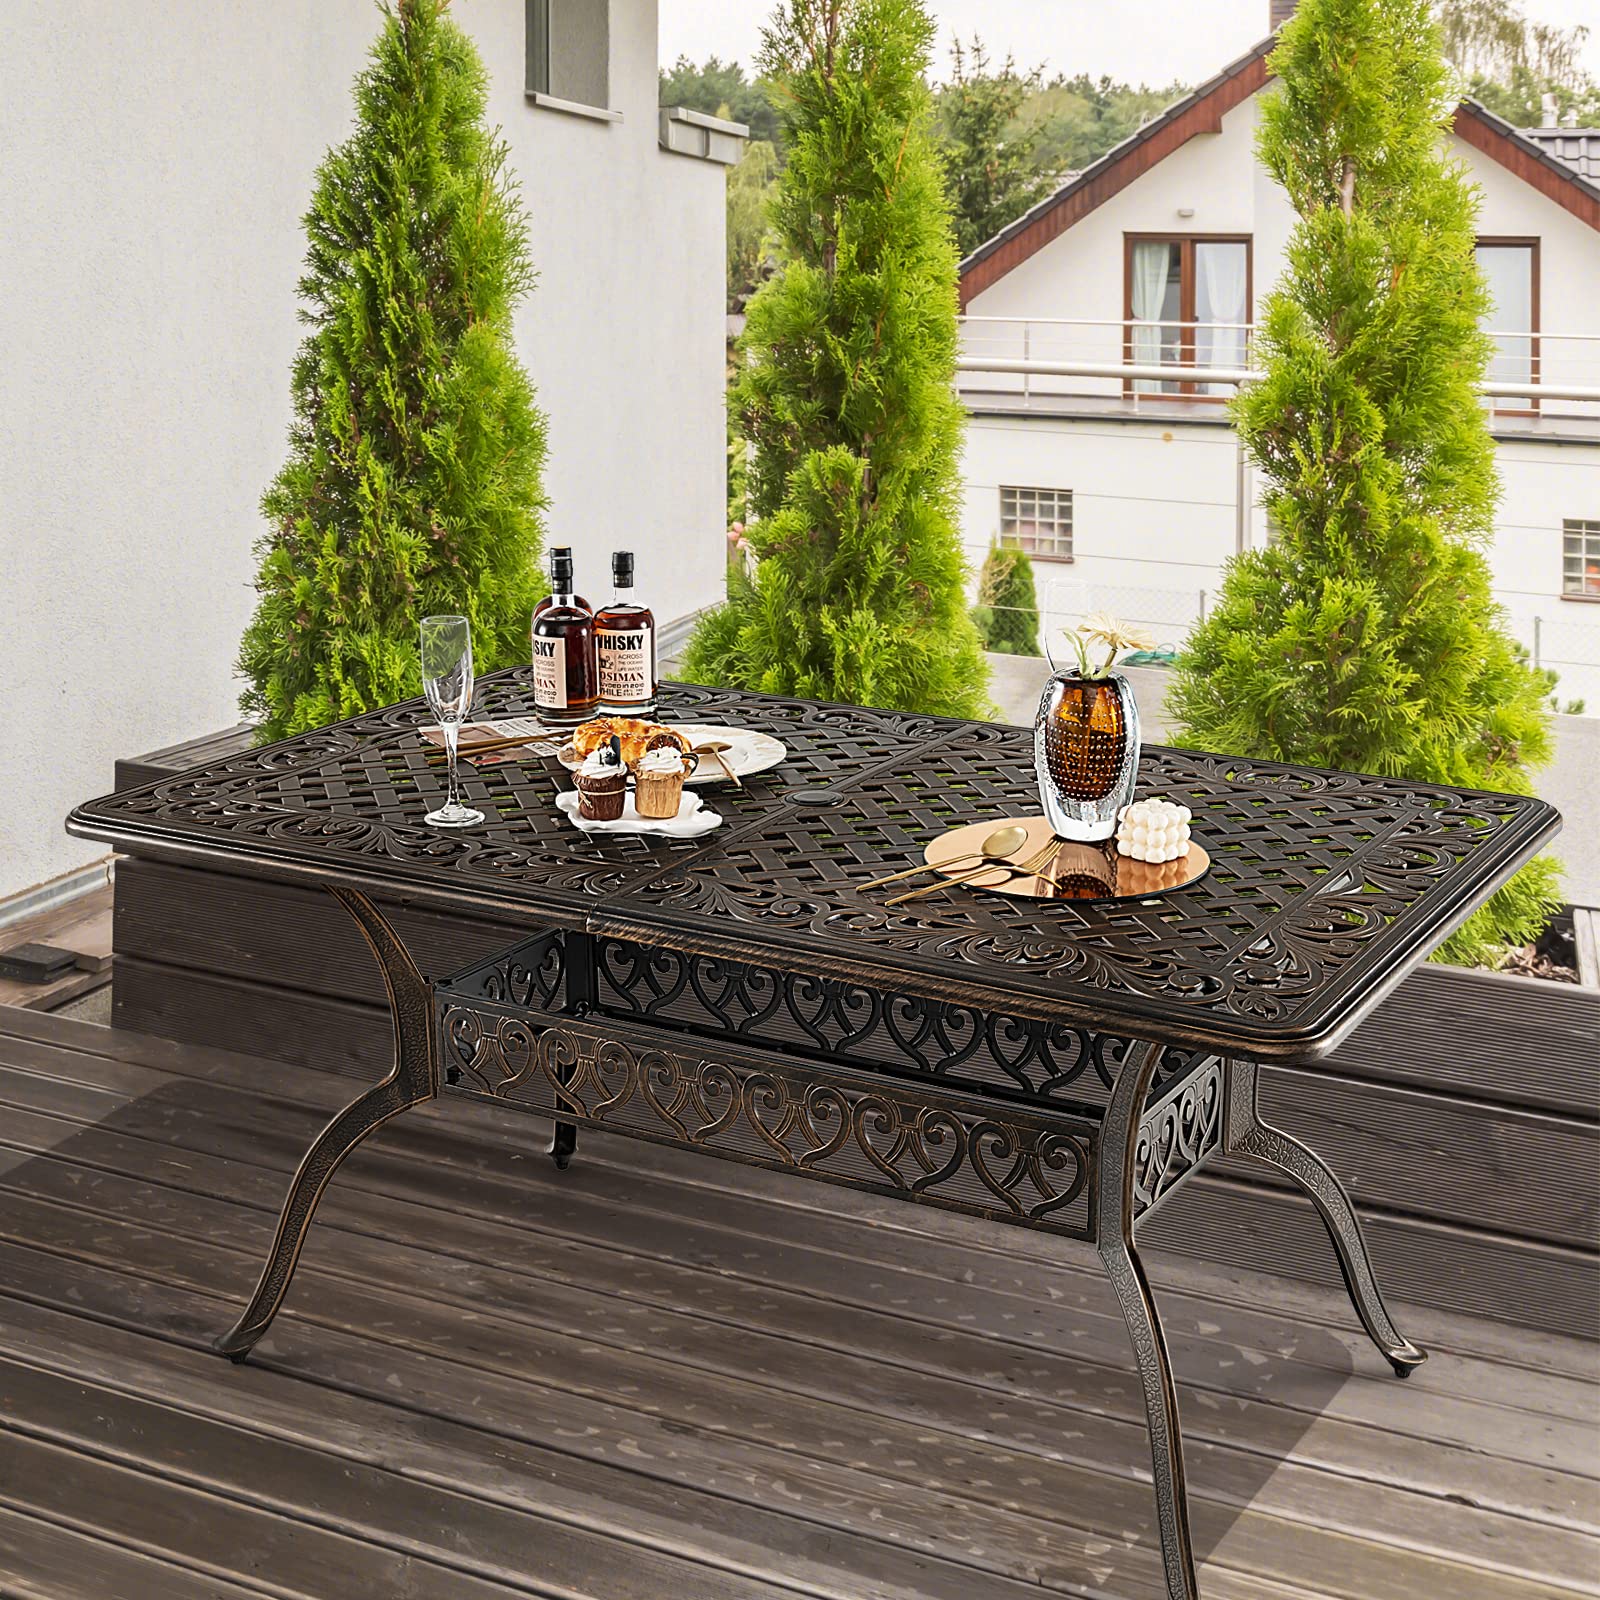 Giantex Patio Dining Table, Cast Aluminum Outdoor Table for 6 or 8 Persons, Heavy-Duty Structure